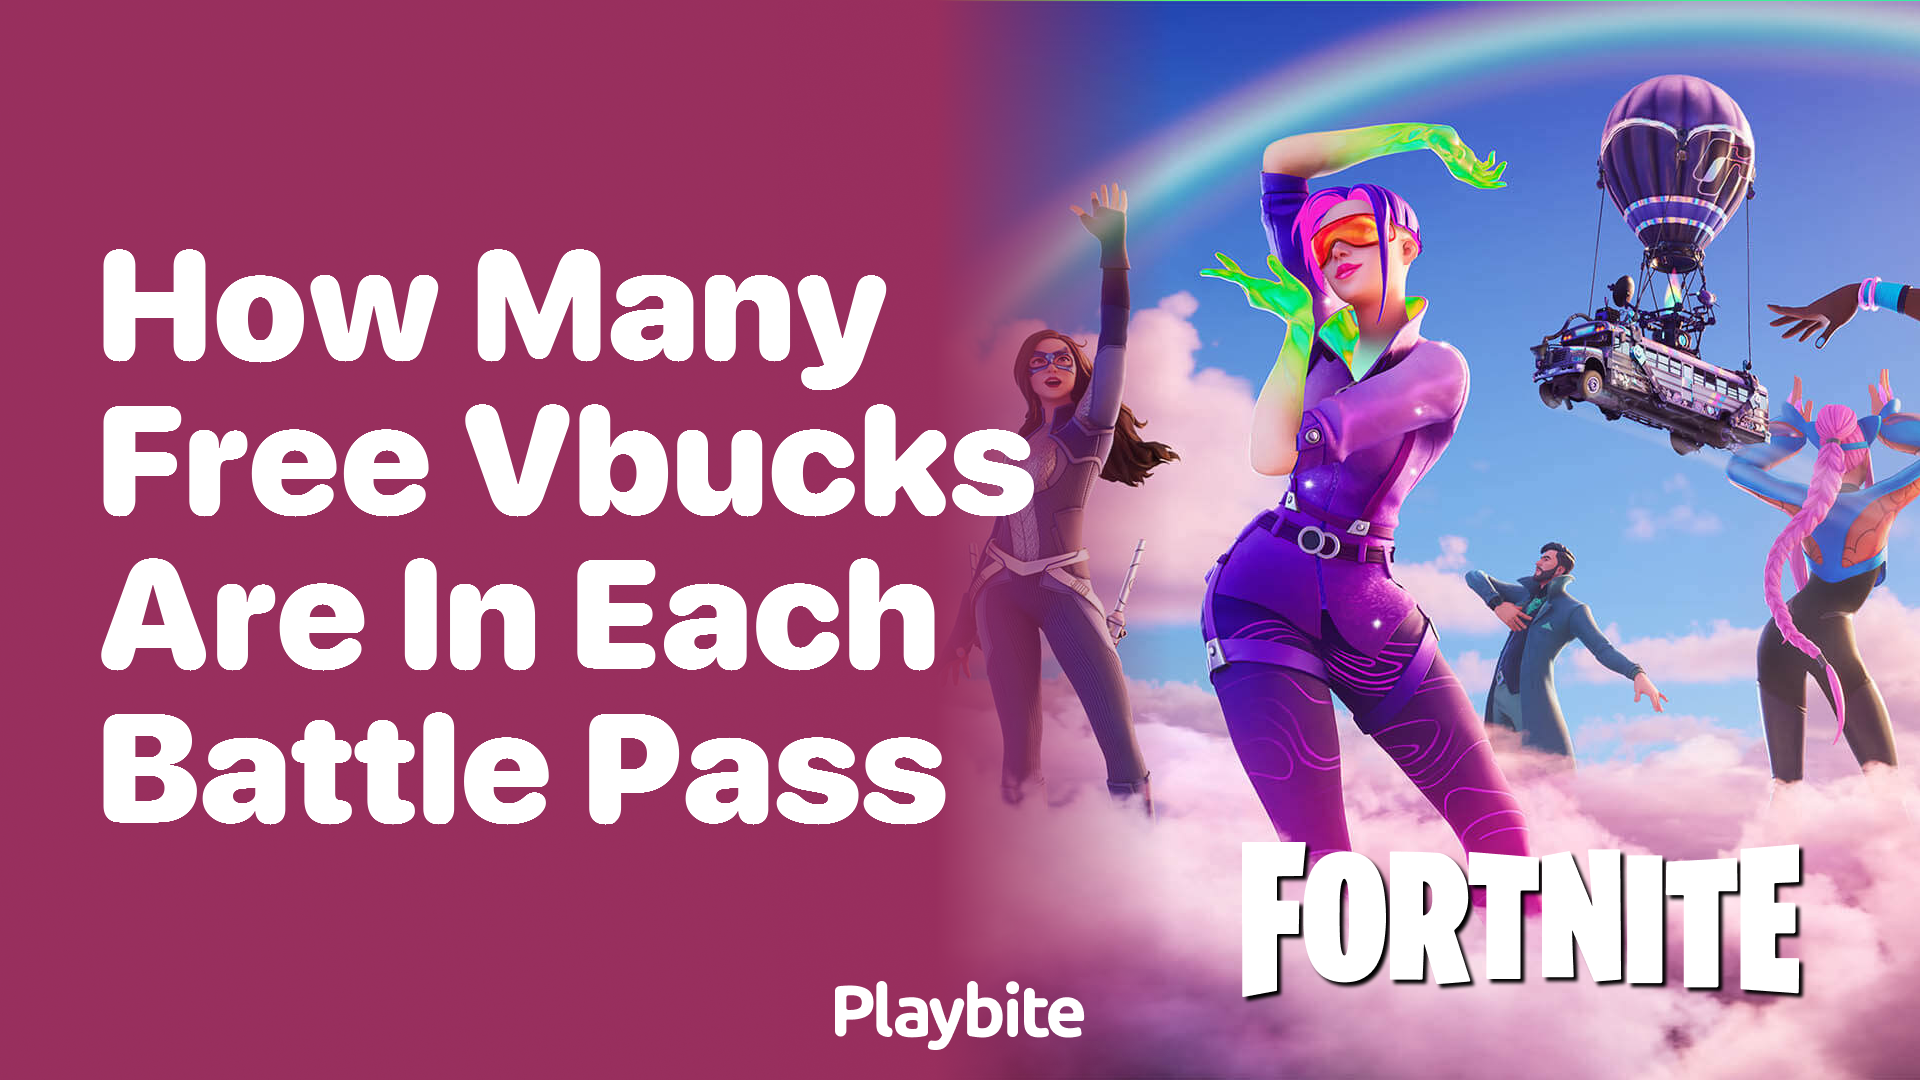 How Many Free V-Bucks Are in Each Battle Pass?